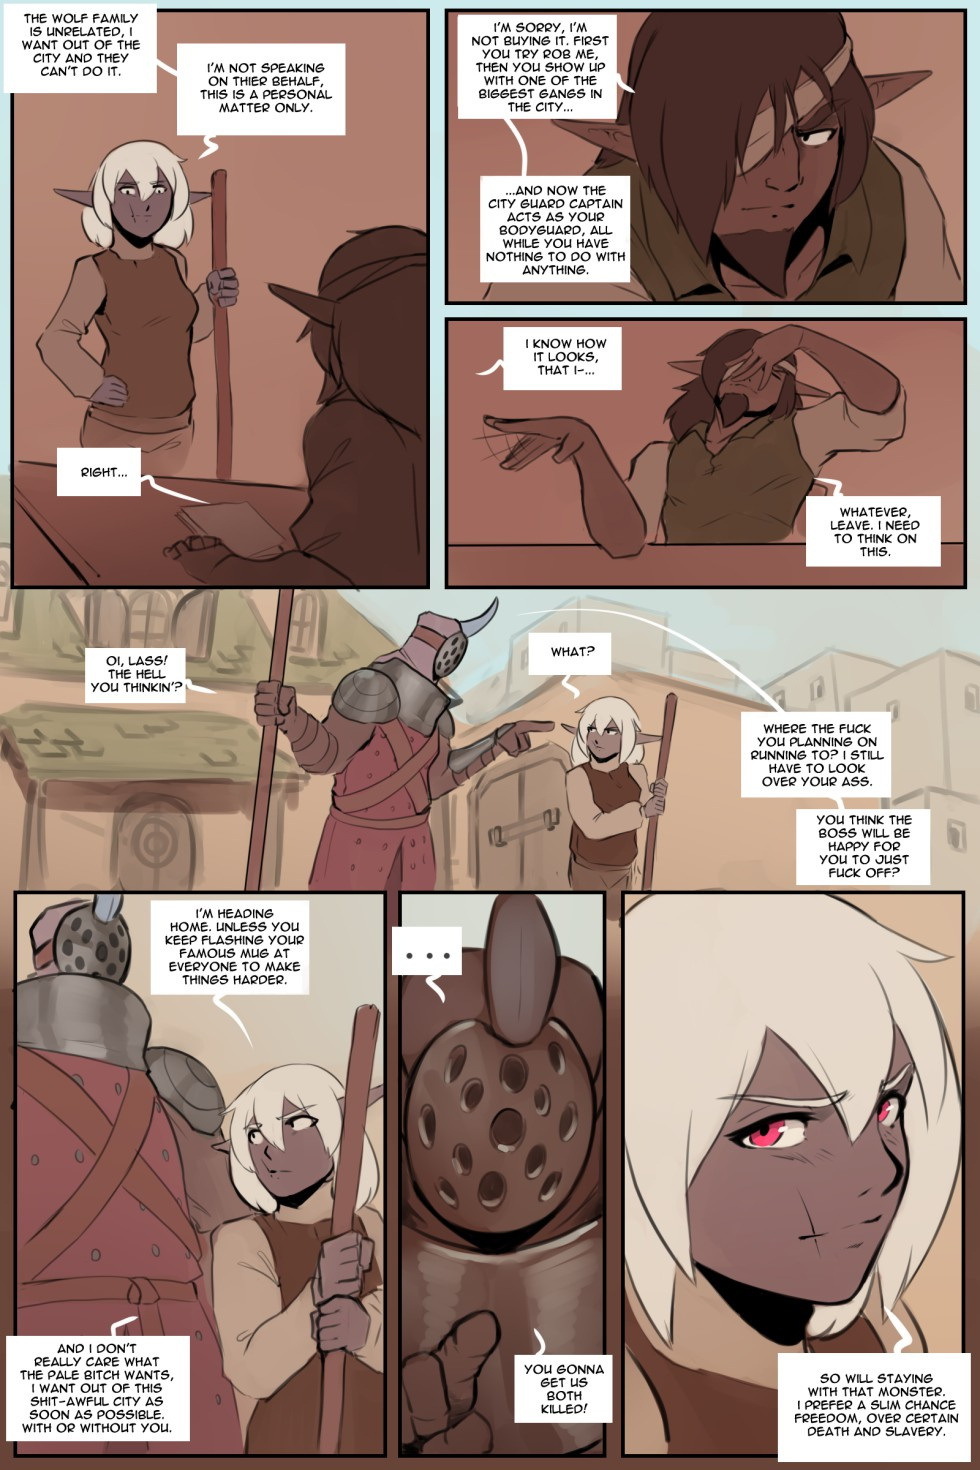 Price For Freedom - Page 273